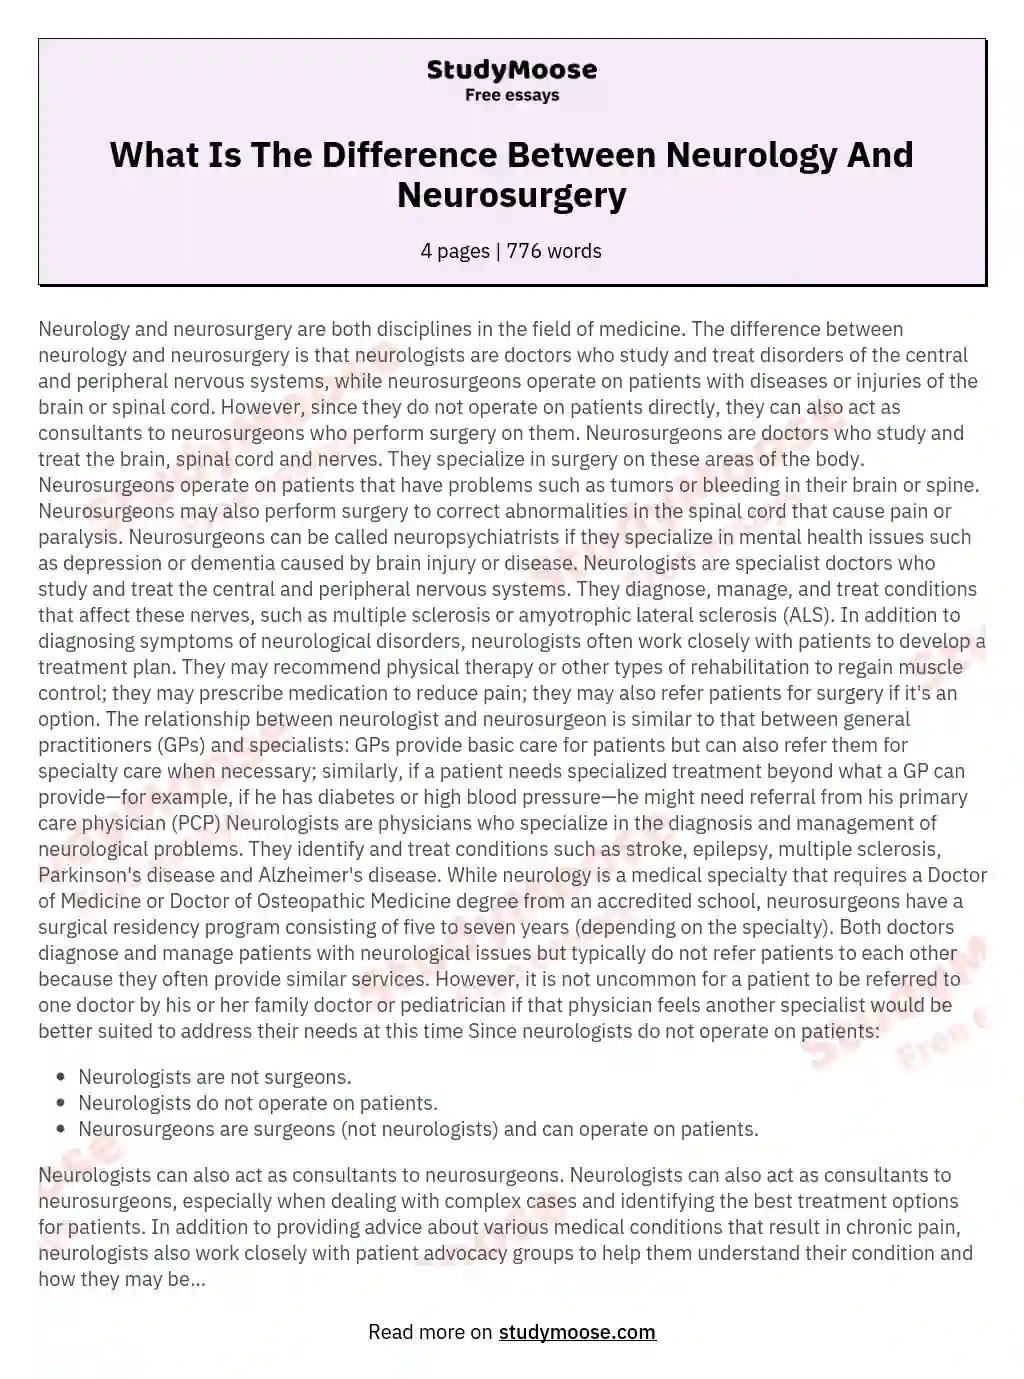 What Is The Difference Between Neurology And Neurosurgery essay